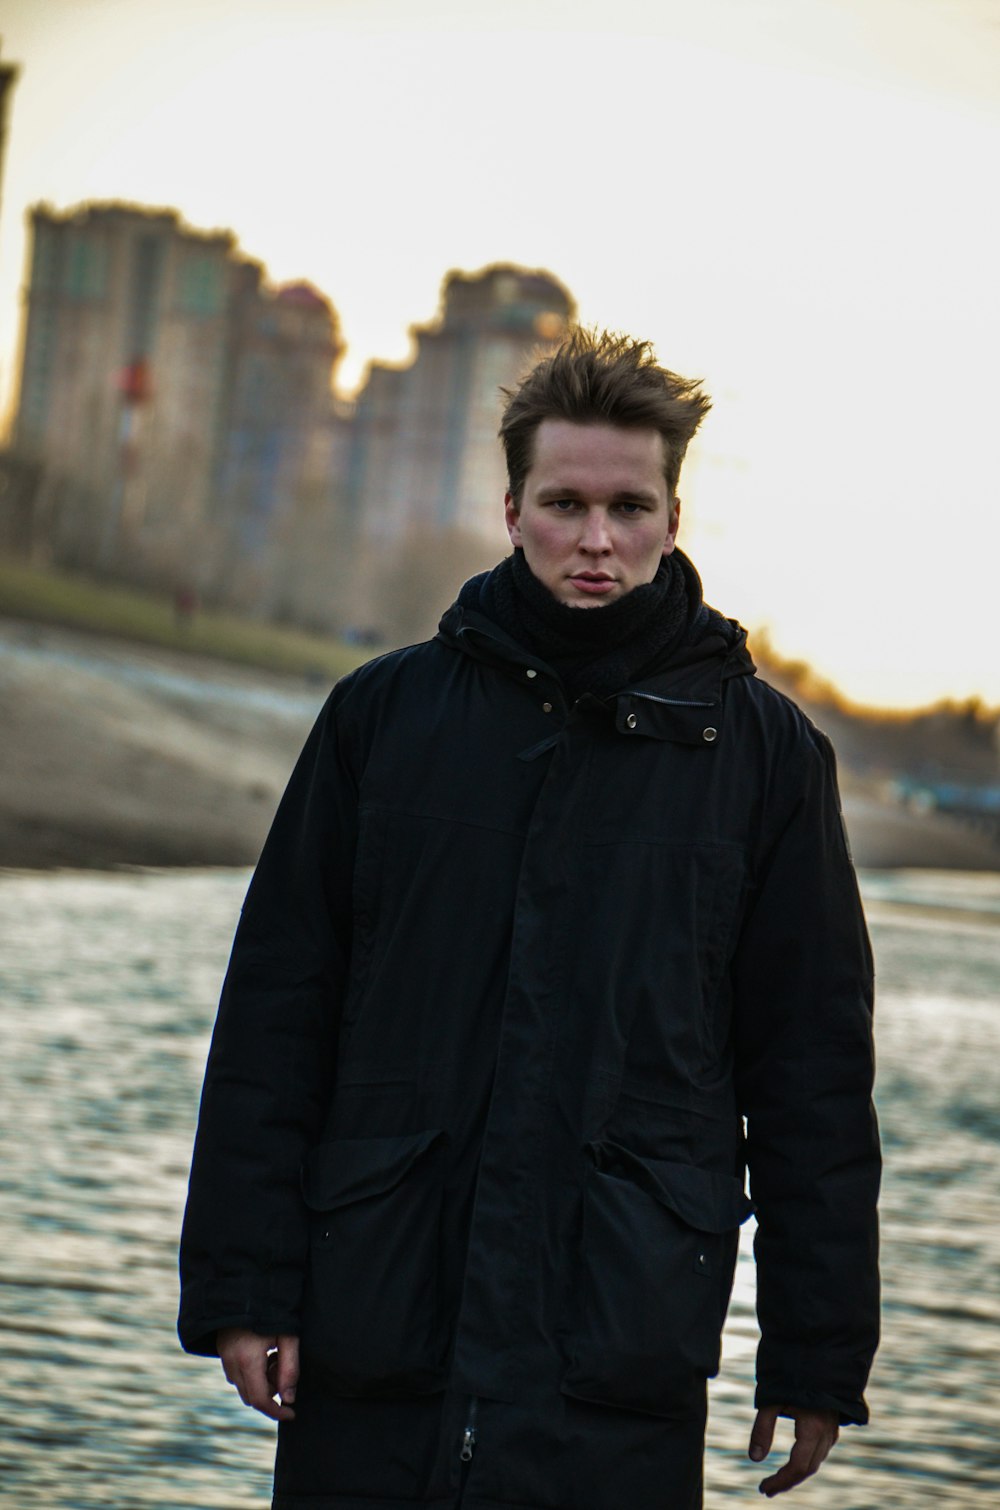 man in black jacket standing near body of water during daytime